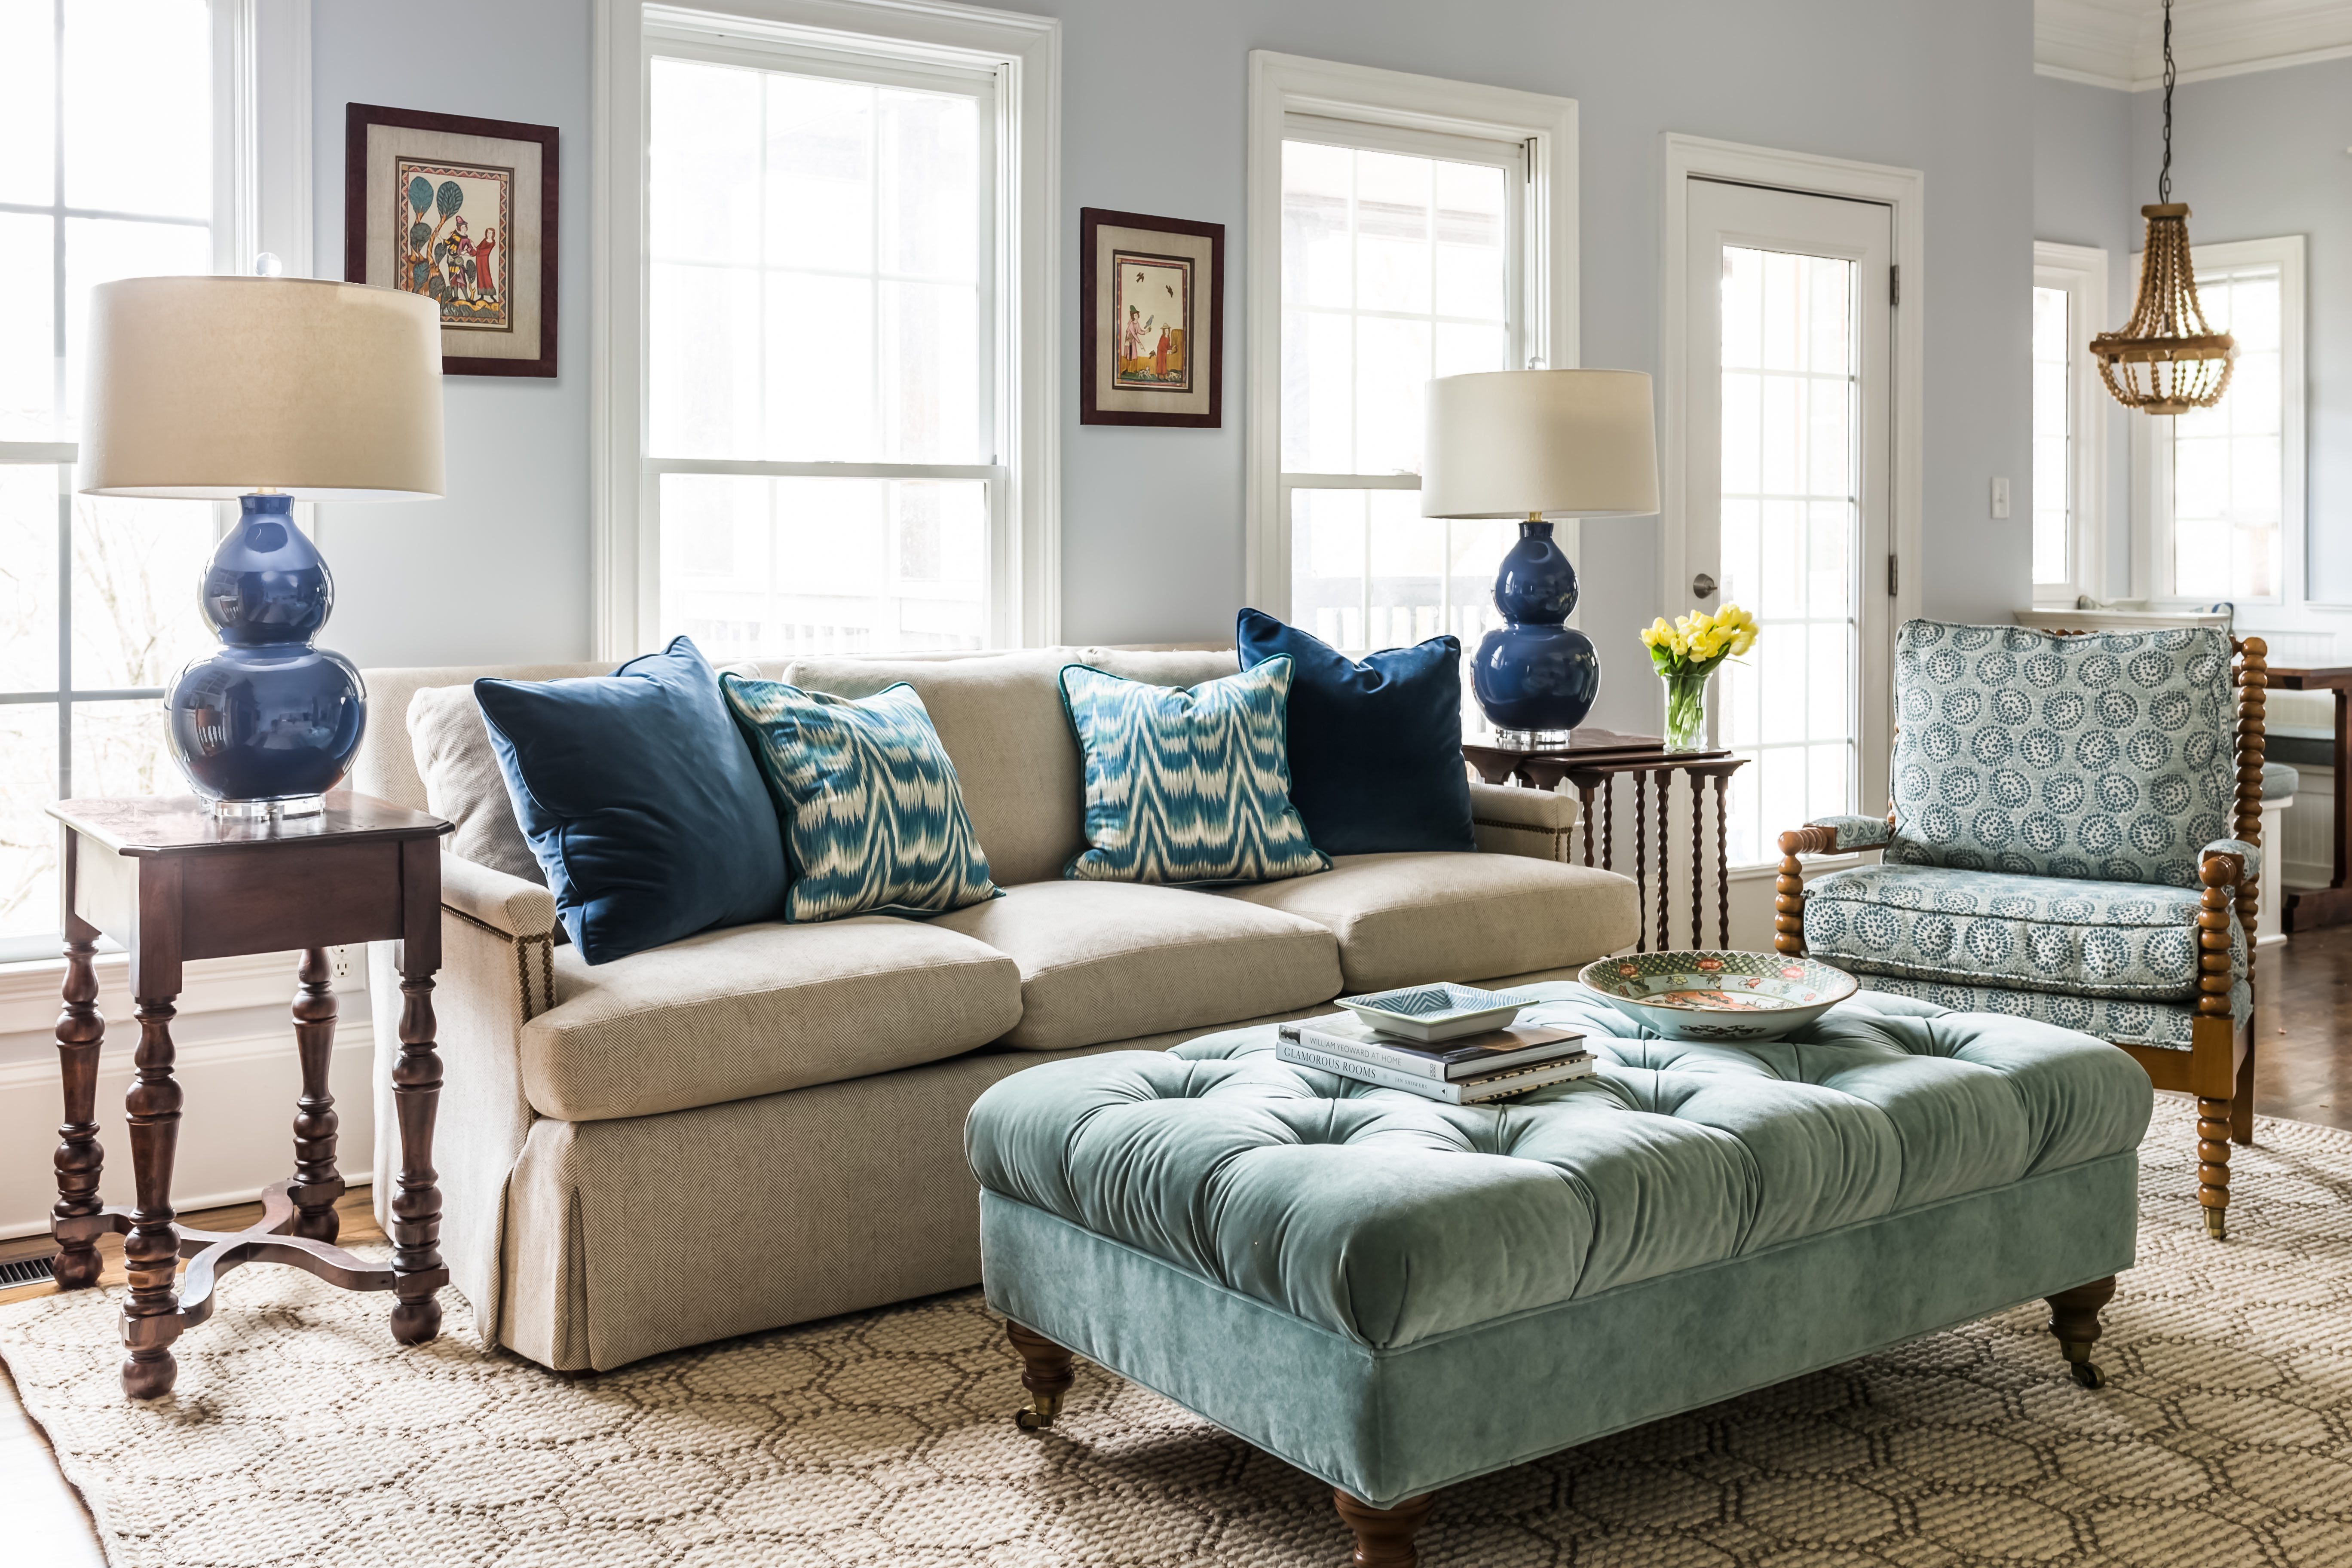 Bold Living Rooms with Patterns - How to Mix Patterns in a Living Room